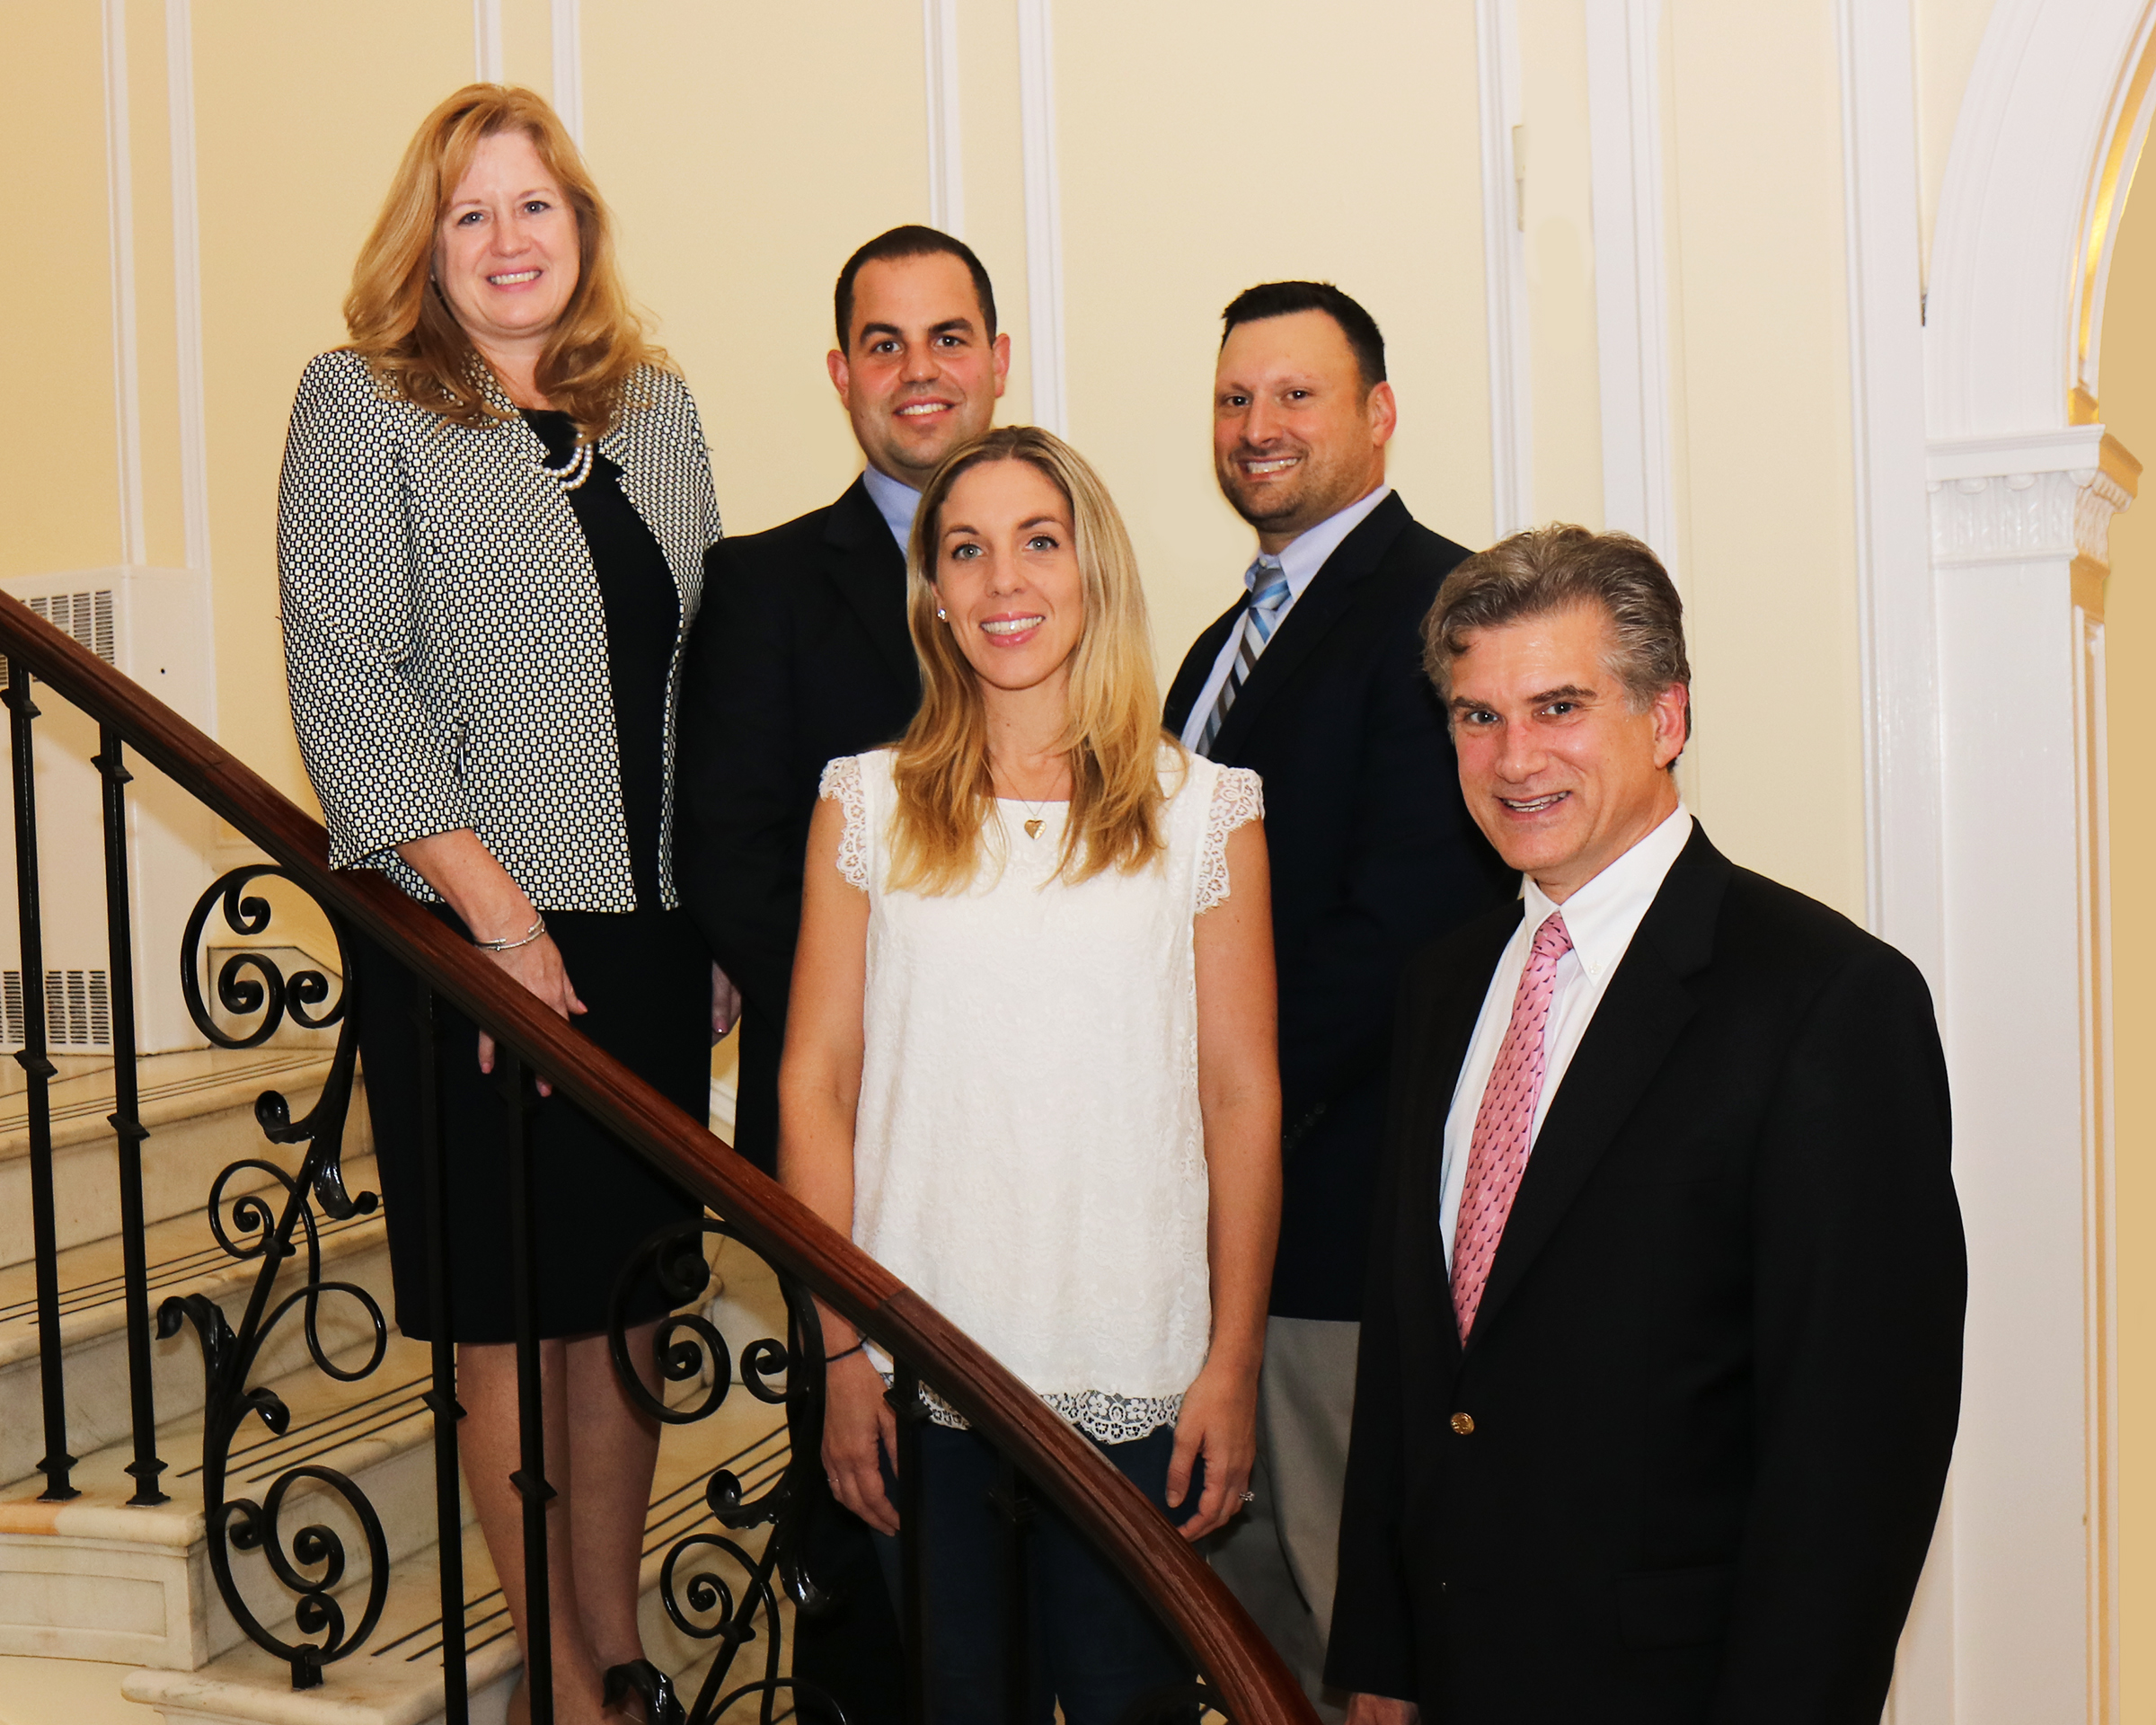 Superintendent of Schools Dr. Teresa Prendergast and Assistant Superintendent for Secondary Education Stephen Lando congratulate Tobias Hatten, Donna Plante, and Michael DiPasquale on their selection as Master Teachers. (Photo courtesy of the Great Neck Public Schools)